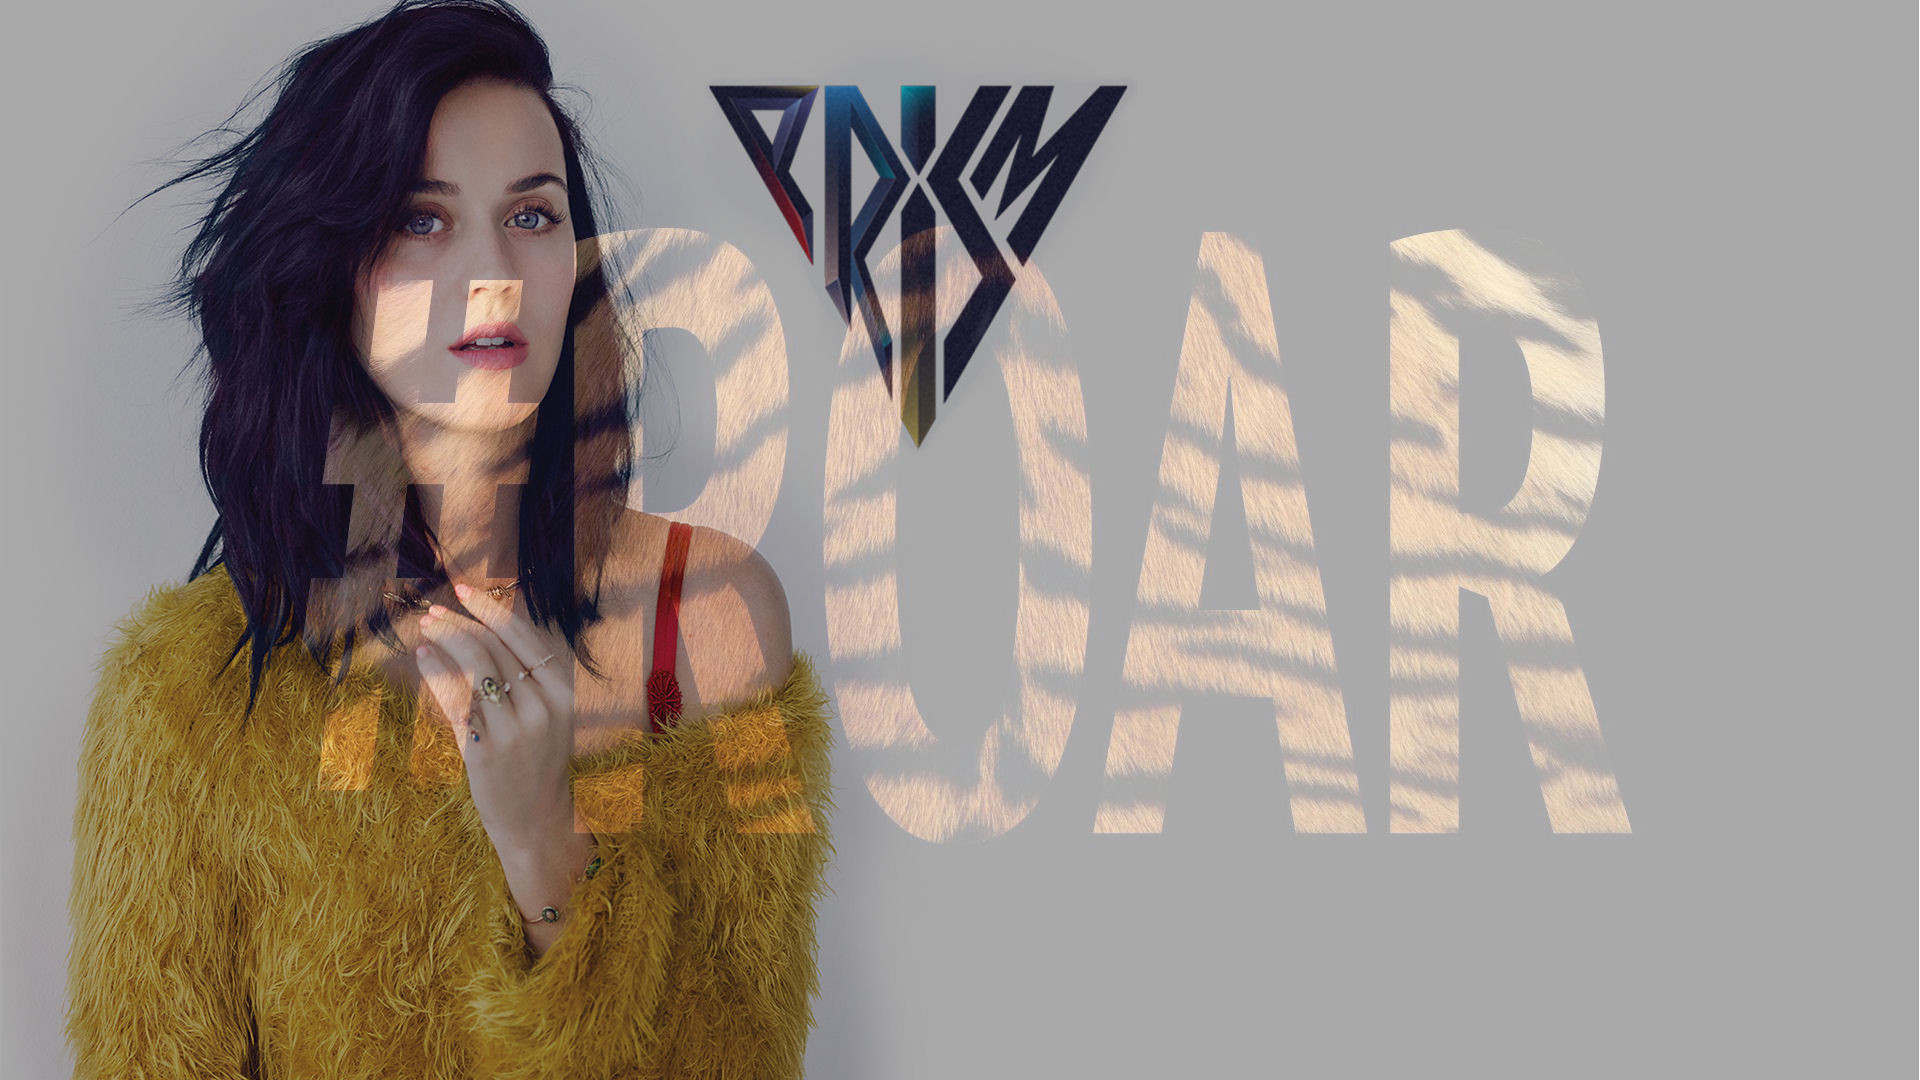 1920x1080 Katy Perry Roar (Prism HD Wallpaper and background photos of Katy Perry  Roar (Prism for fans of Katy Perry images.